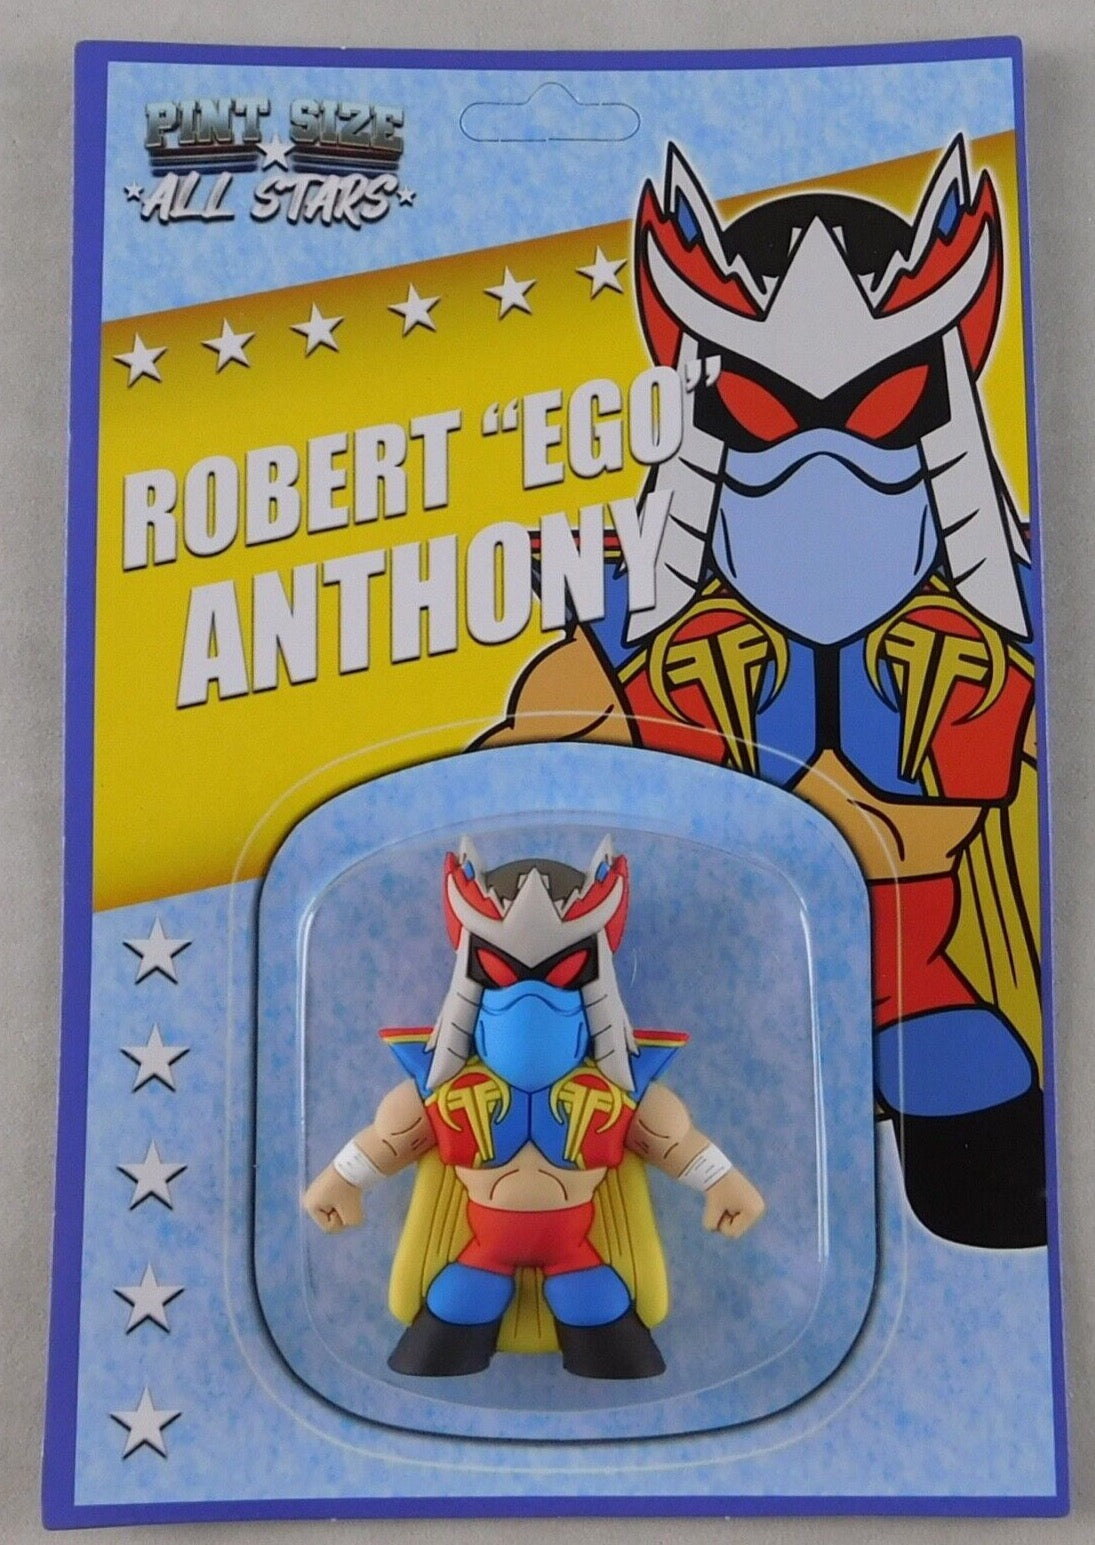 2020 Pro Wrestling Loot Pint Size All Stars Robert "Ego" Anthony [October]